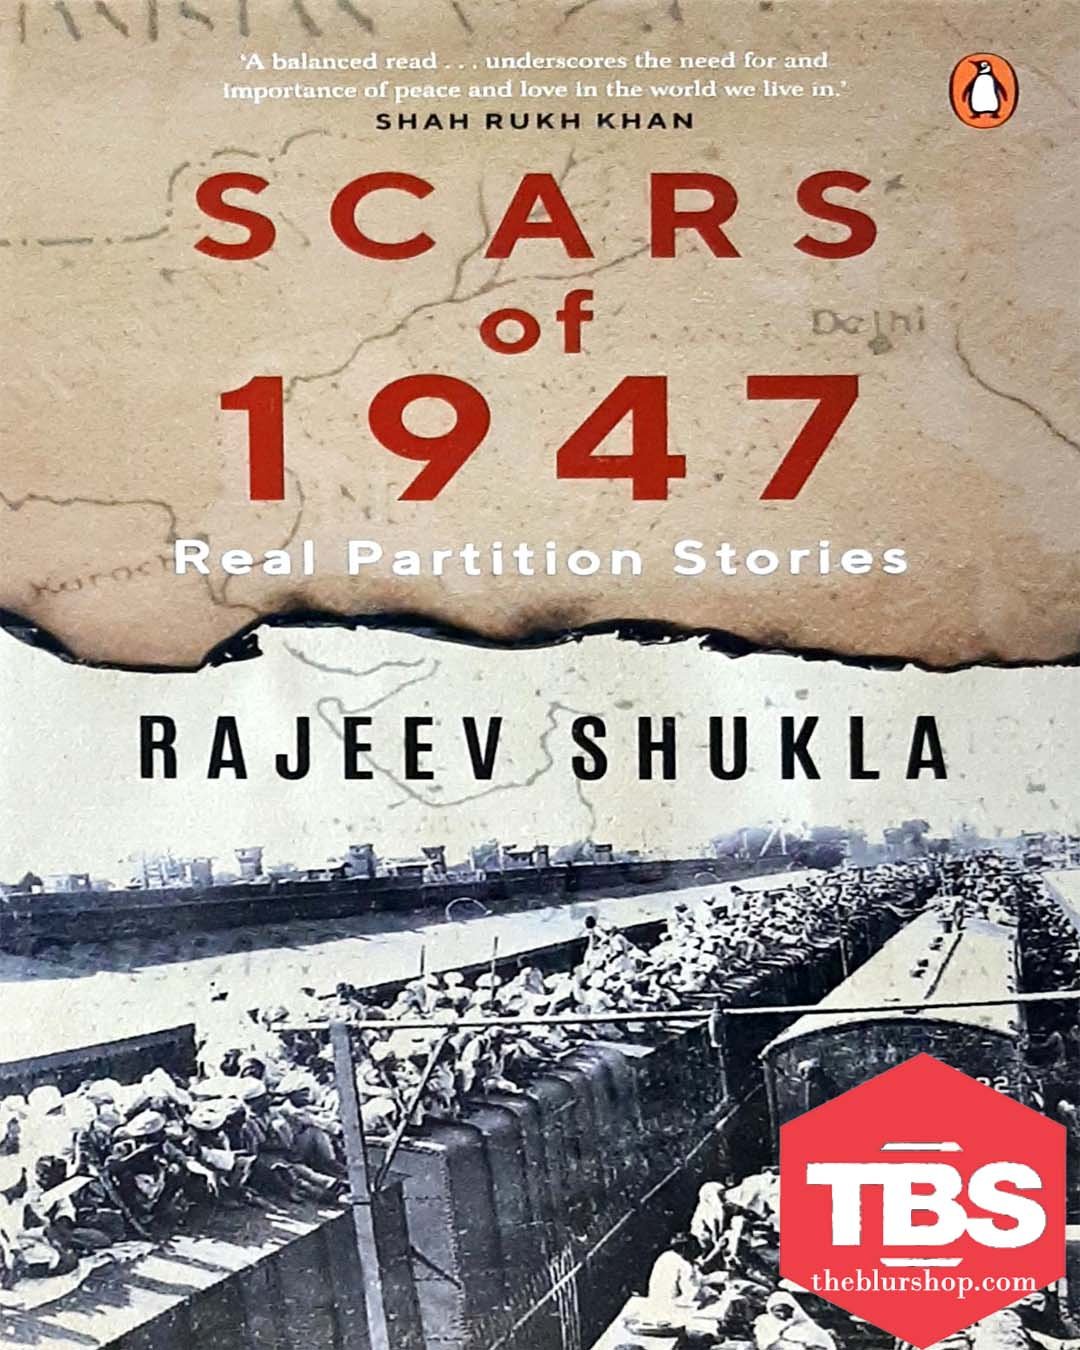 Scars of 1947